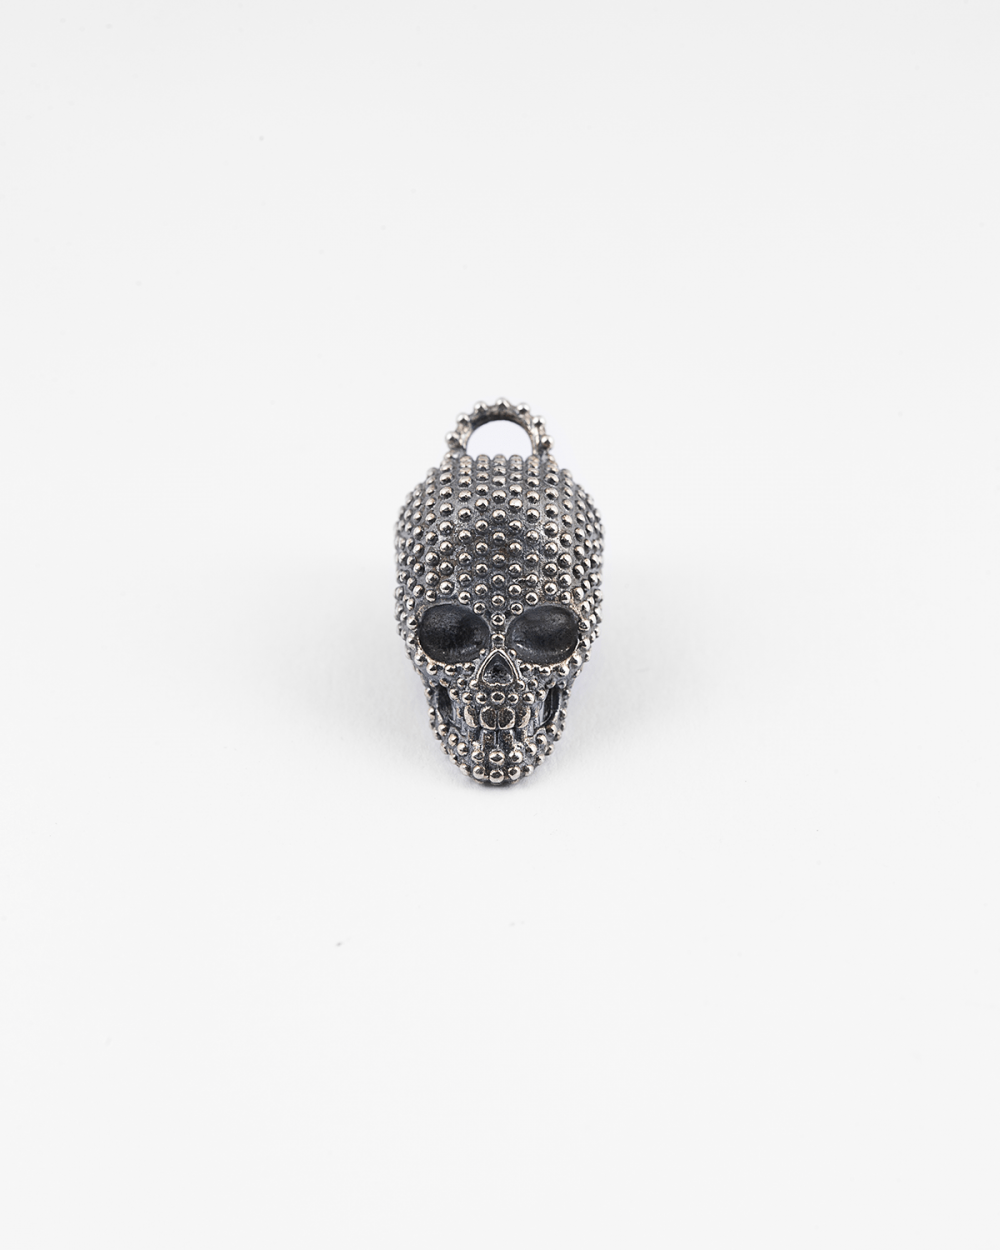 DOTTED SKULL PENDANT WITH CLASP